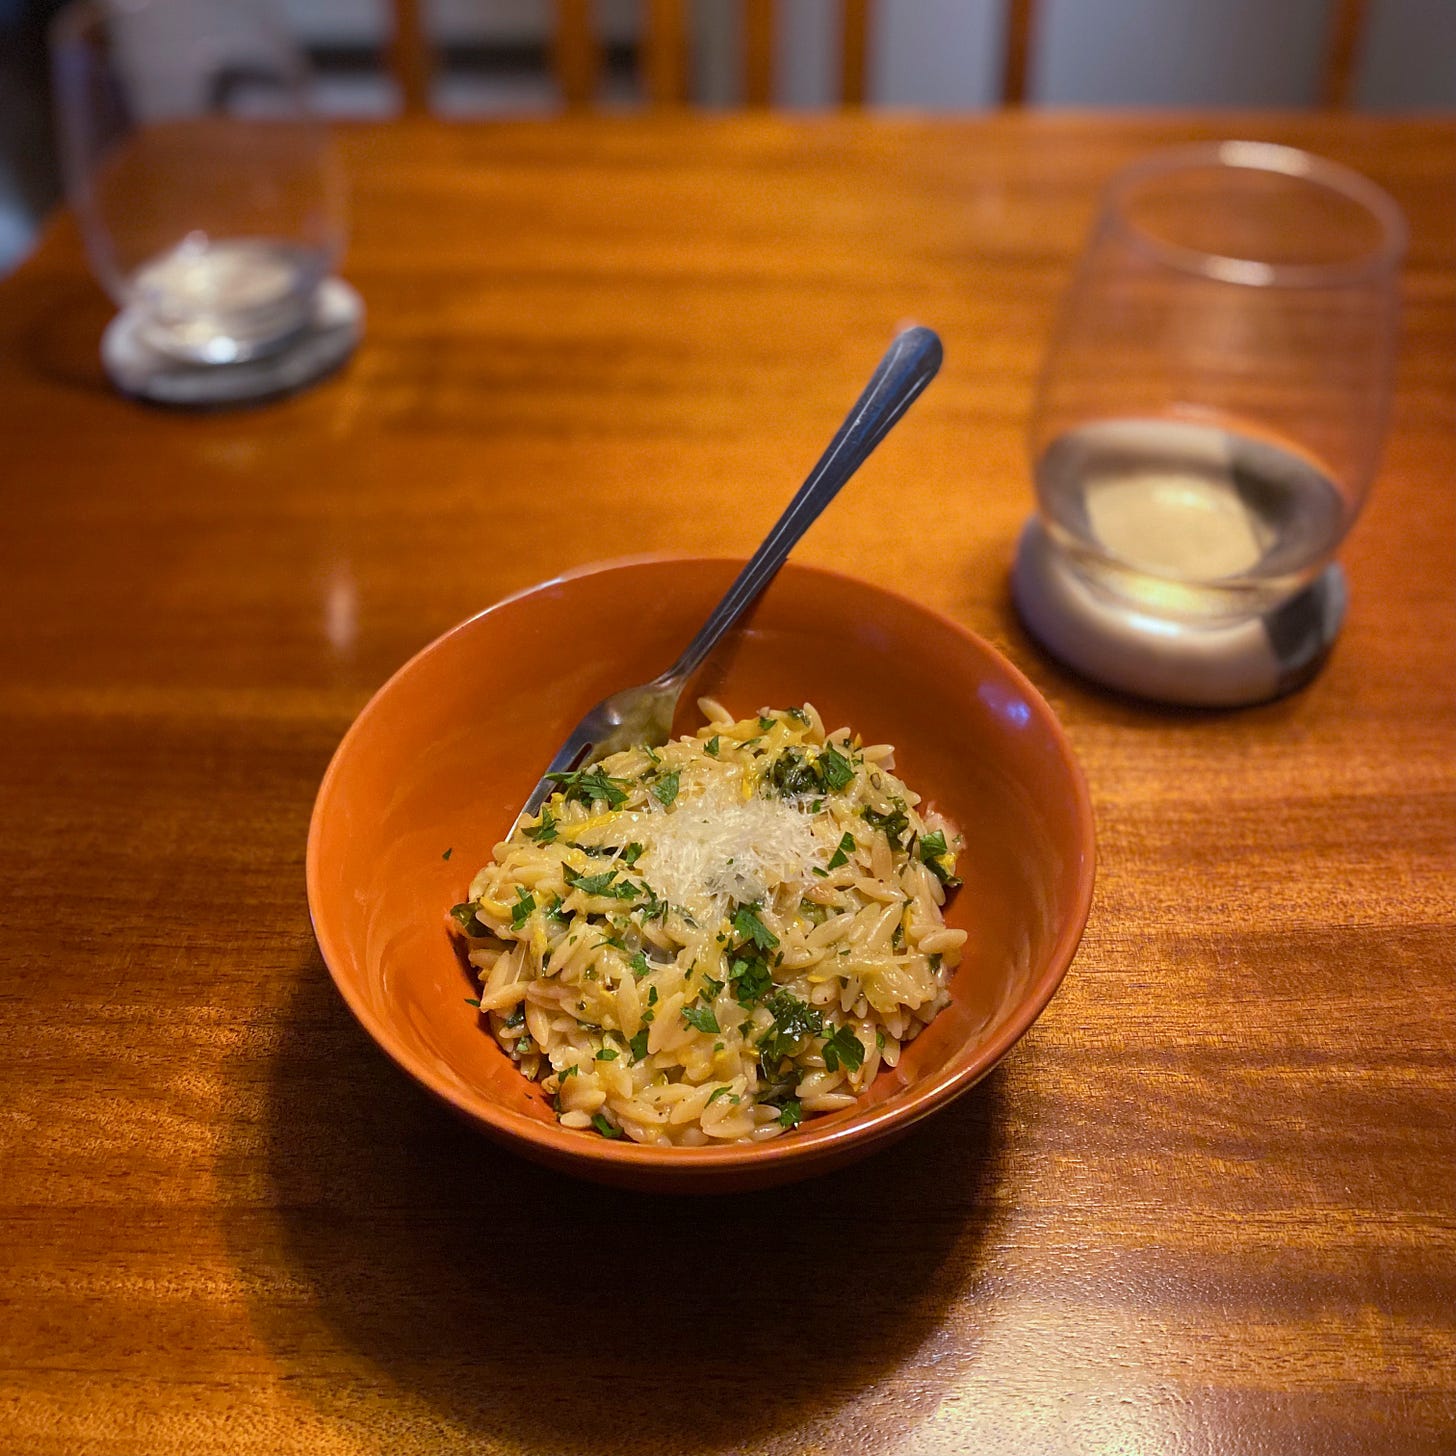 An orange bowl of the orzo described above, with pieces of kale and parsley visible throughout. Parmesan is grated into a little pile on top, and a fork rests at the back of the bowl. On a coaster to the right is a glass of white wine.